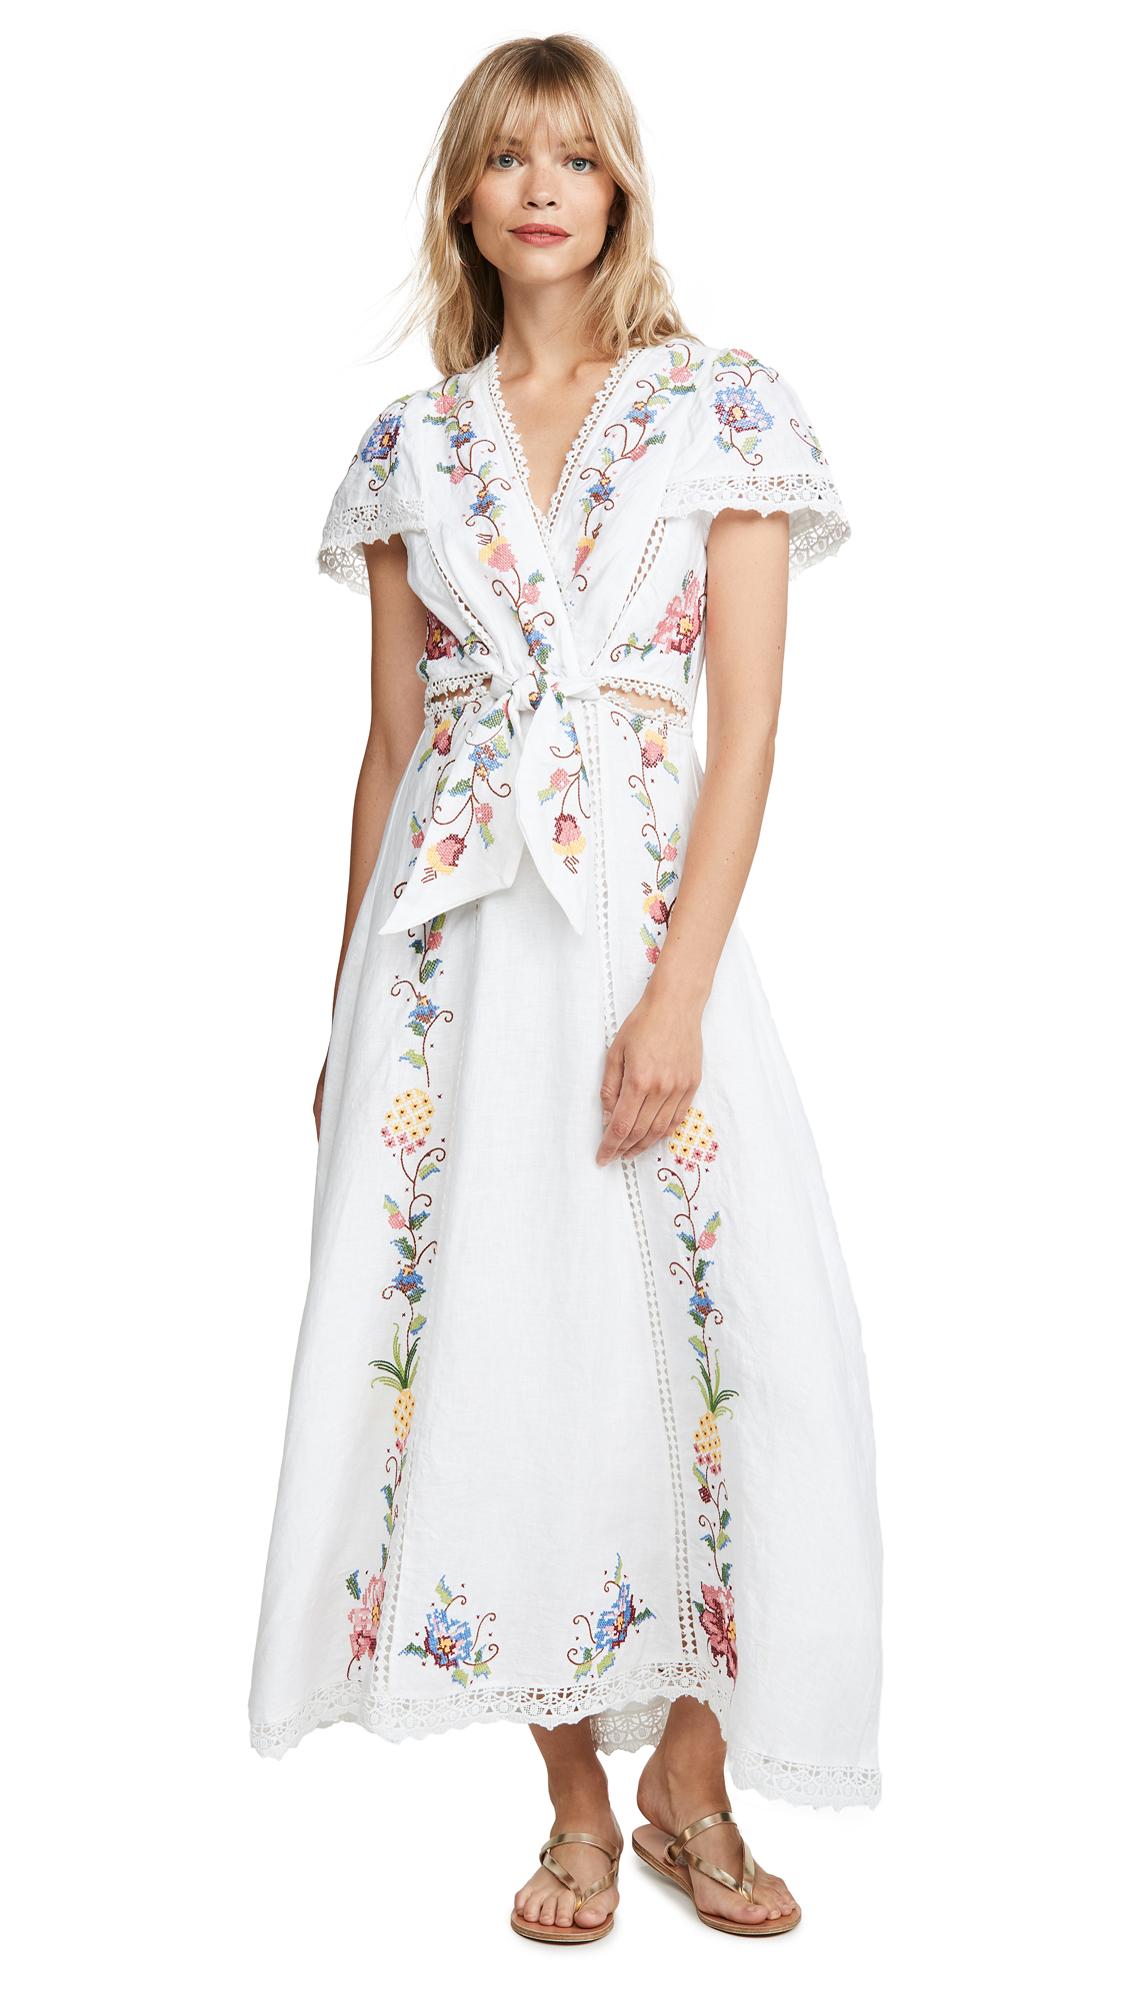 FARM Rio Linen Embroidered Front Knot Dress in White - Lyst